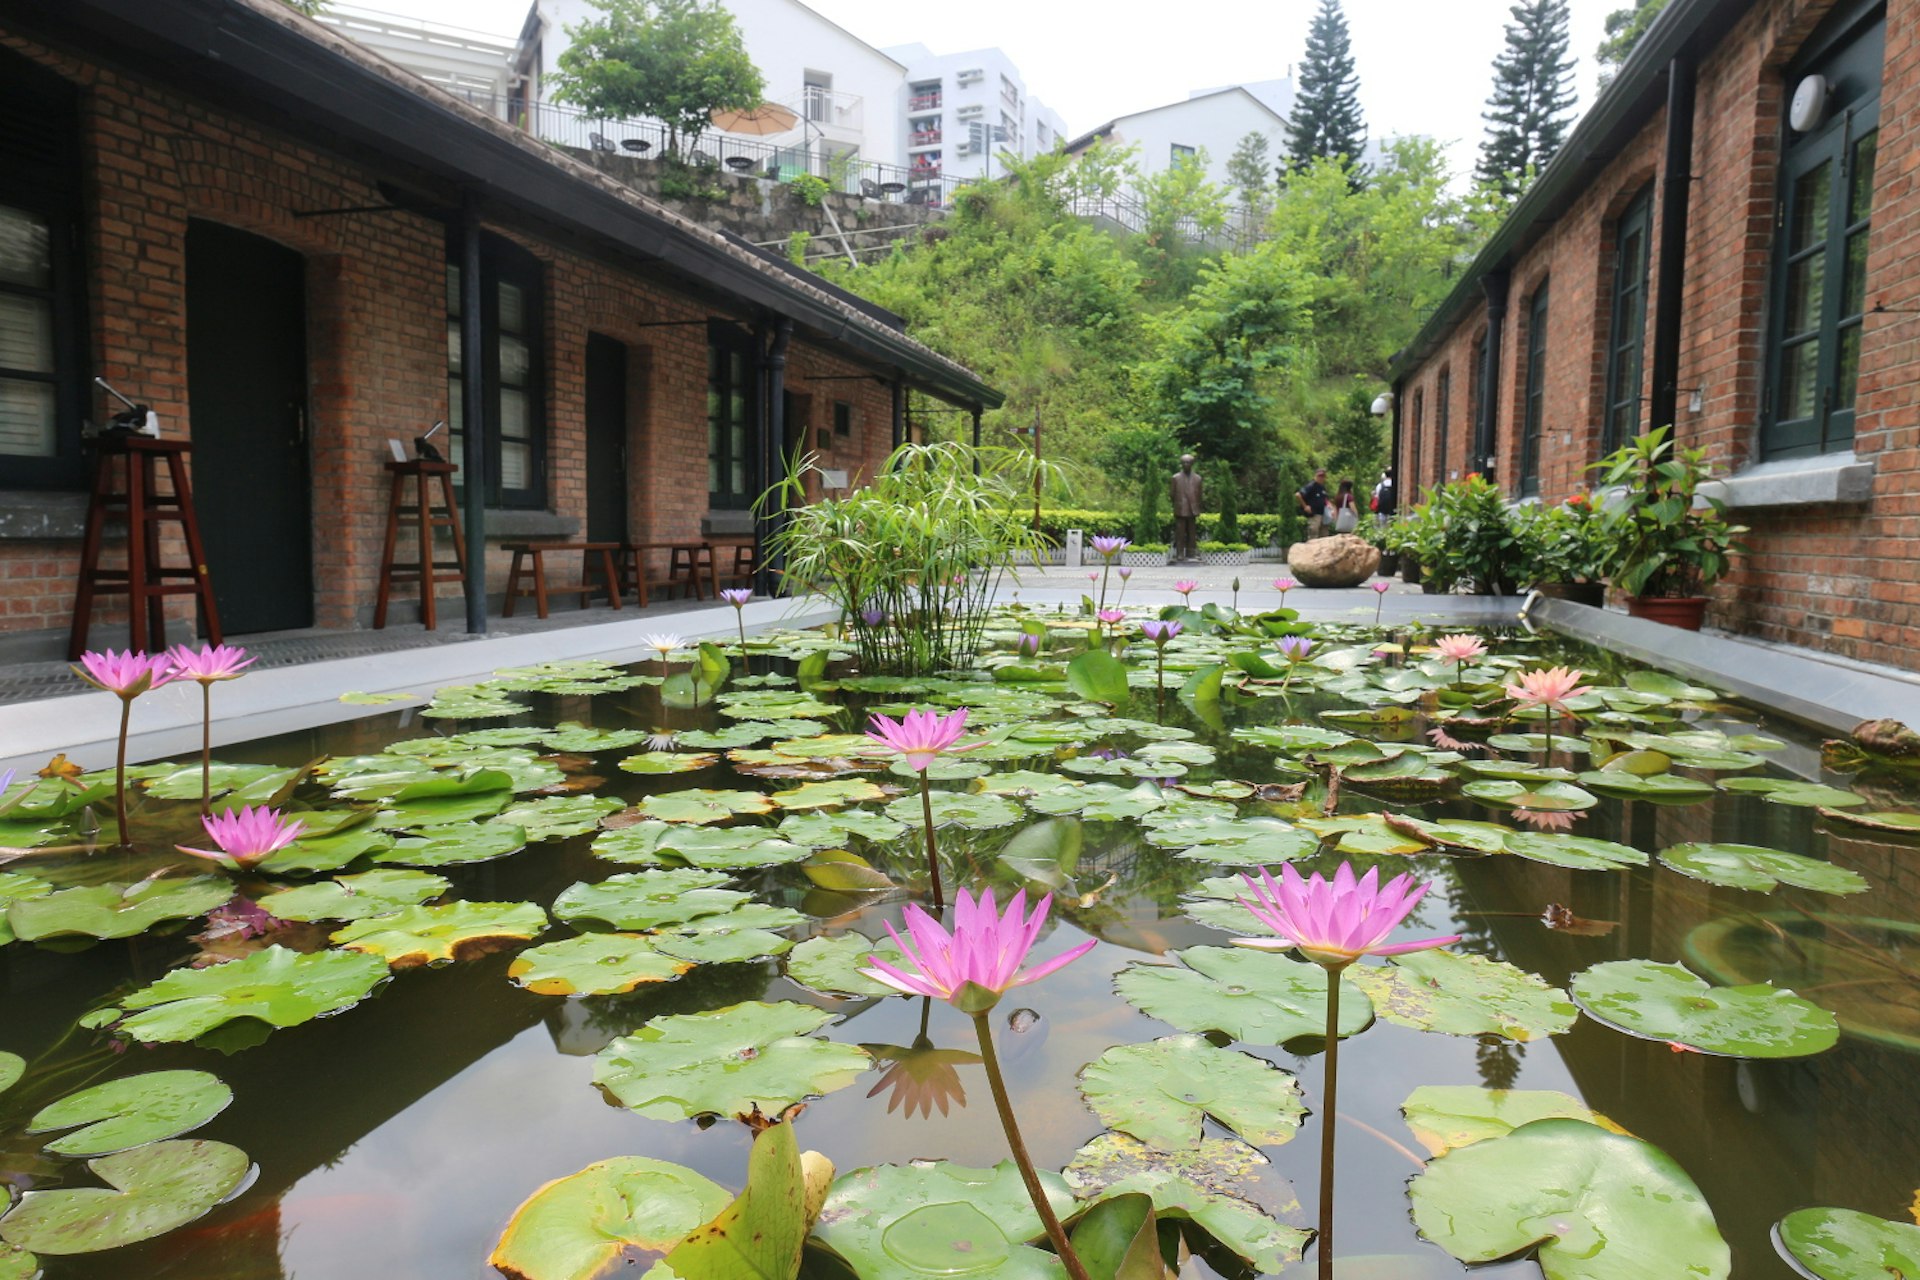 Picturesque sleep beside the lily pond at Jao Tsung-I Academy. Image by Piera Chen / Lonely Planet